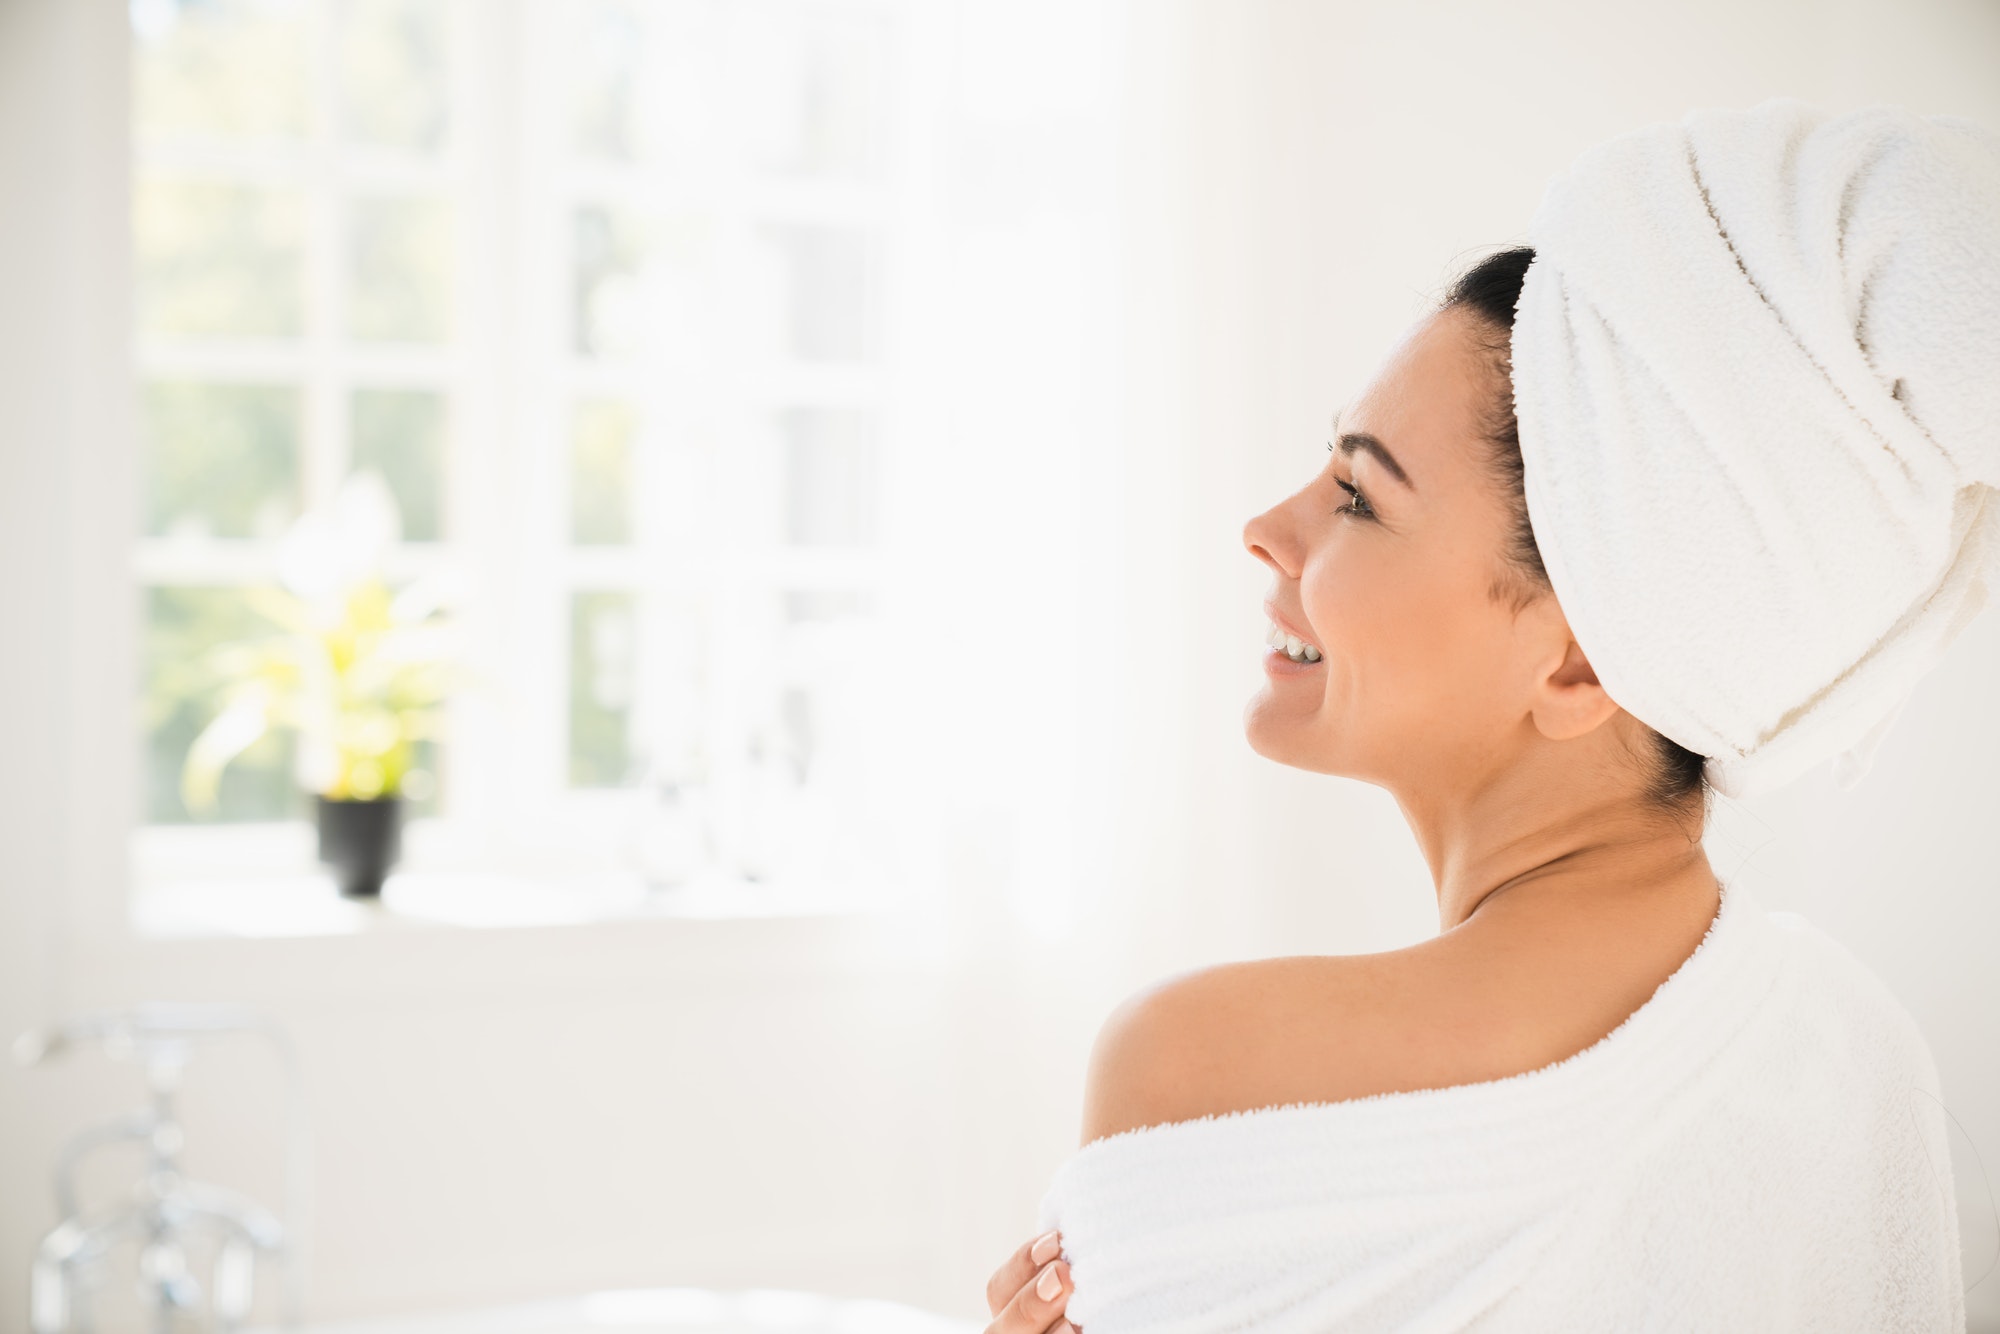 Mature woman in turban and spa bathrobe relaxing after hot shower bath at home resort spa hotel.